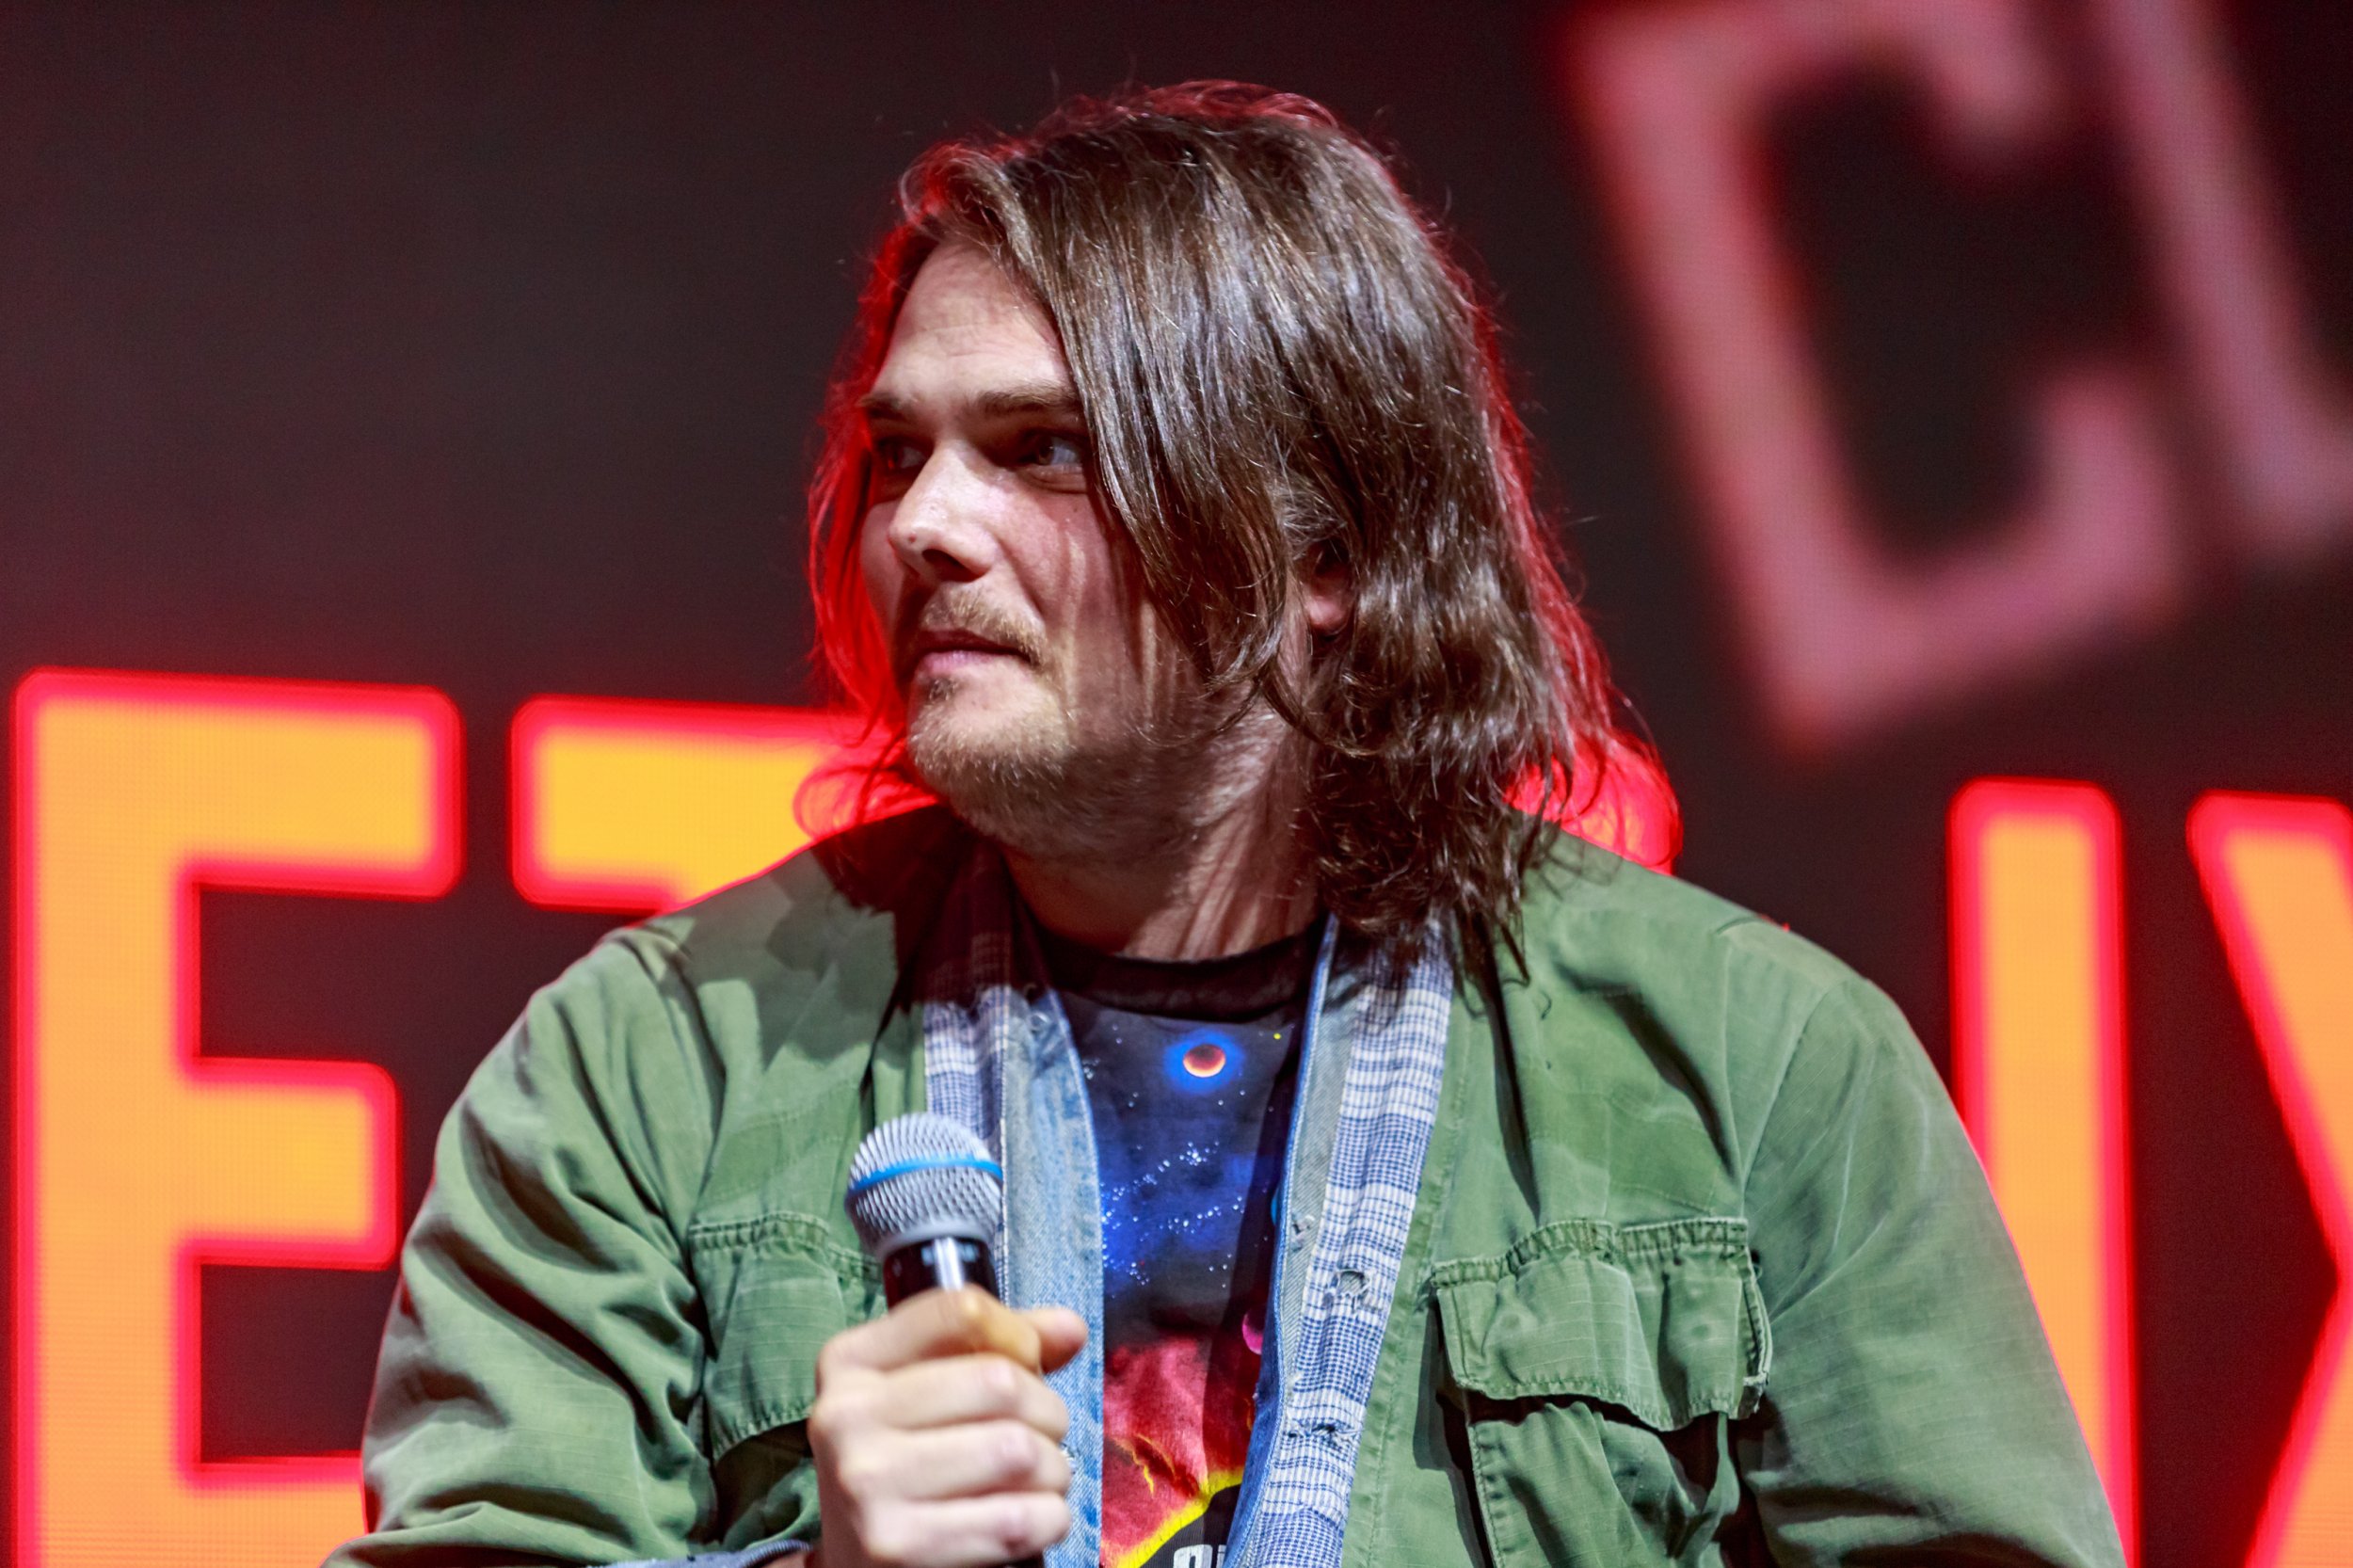 Gerard Way Talks 9/11, the End of the World, 'Umbrella Academy' and His